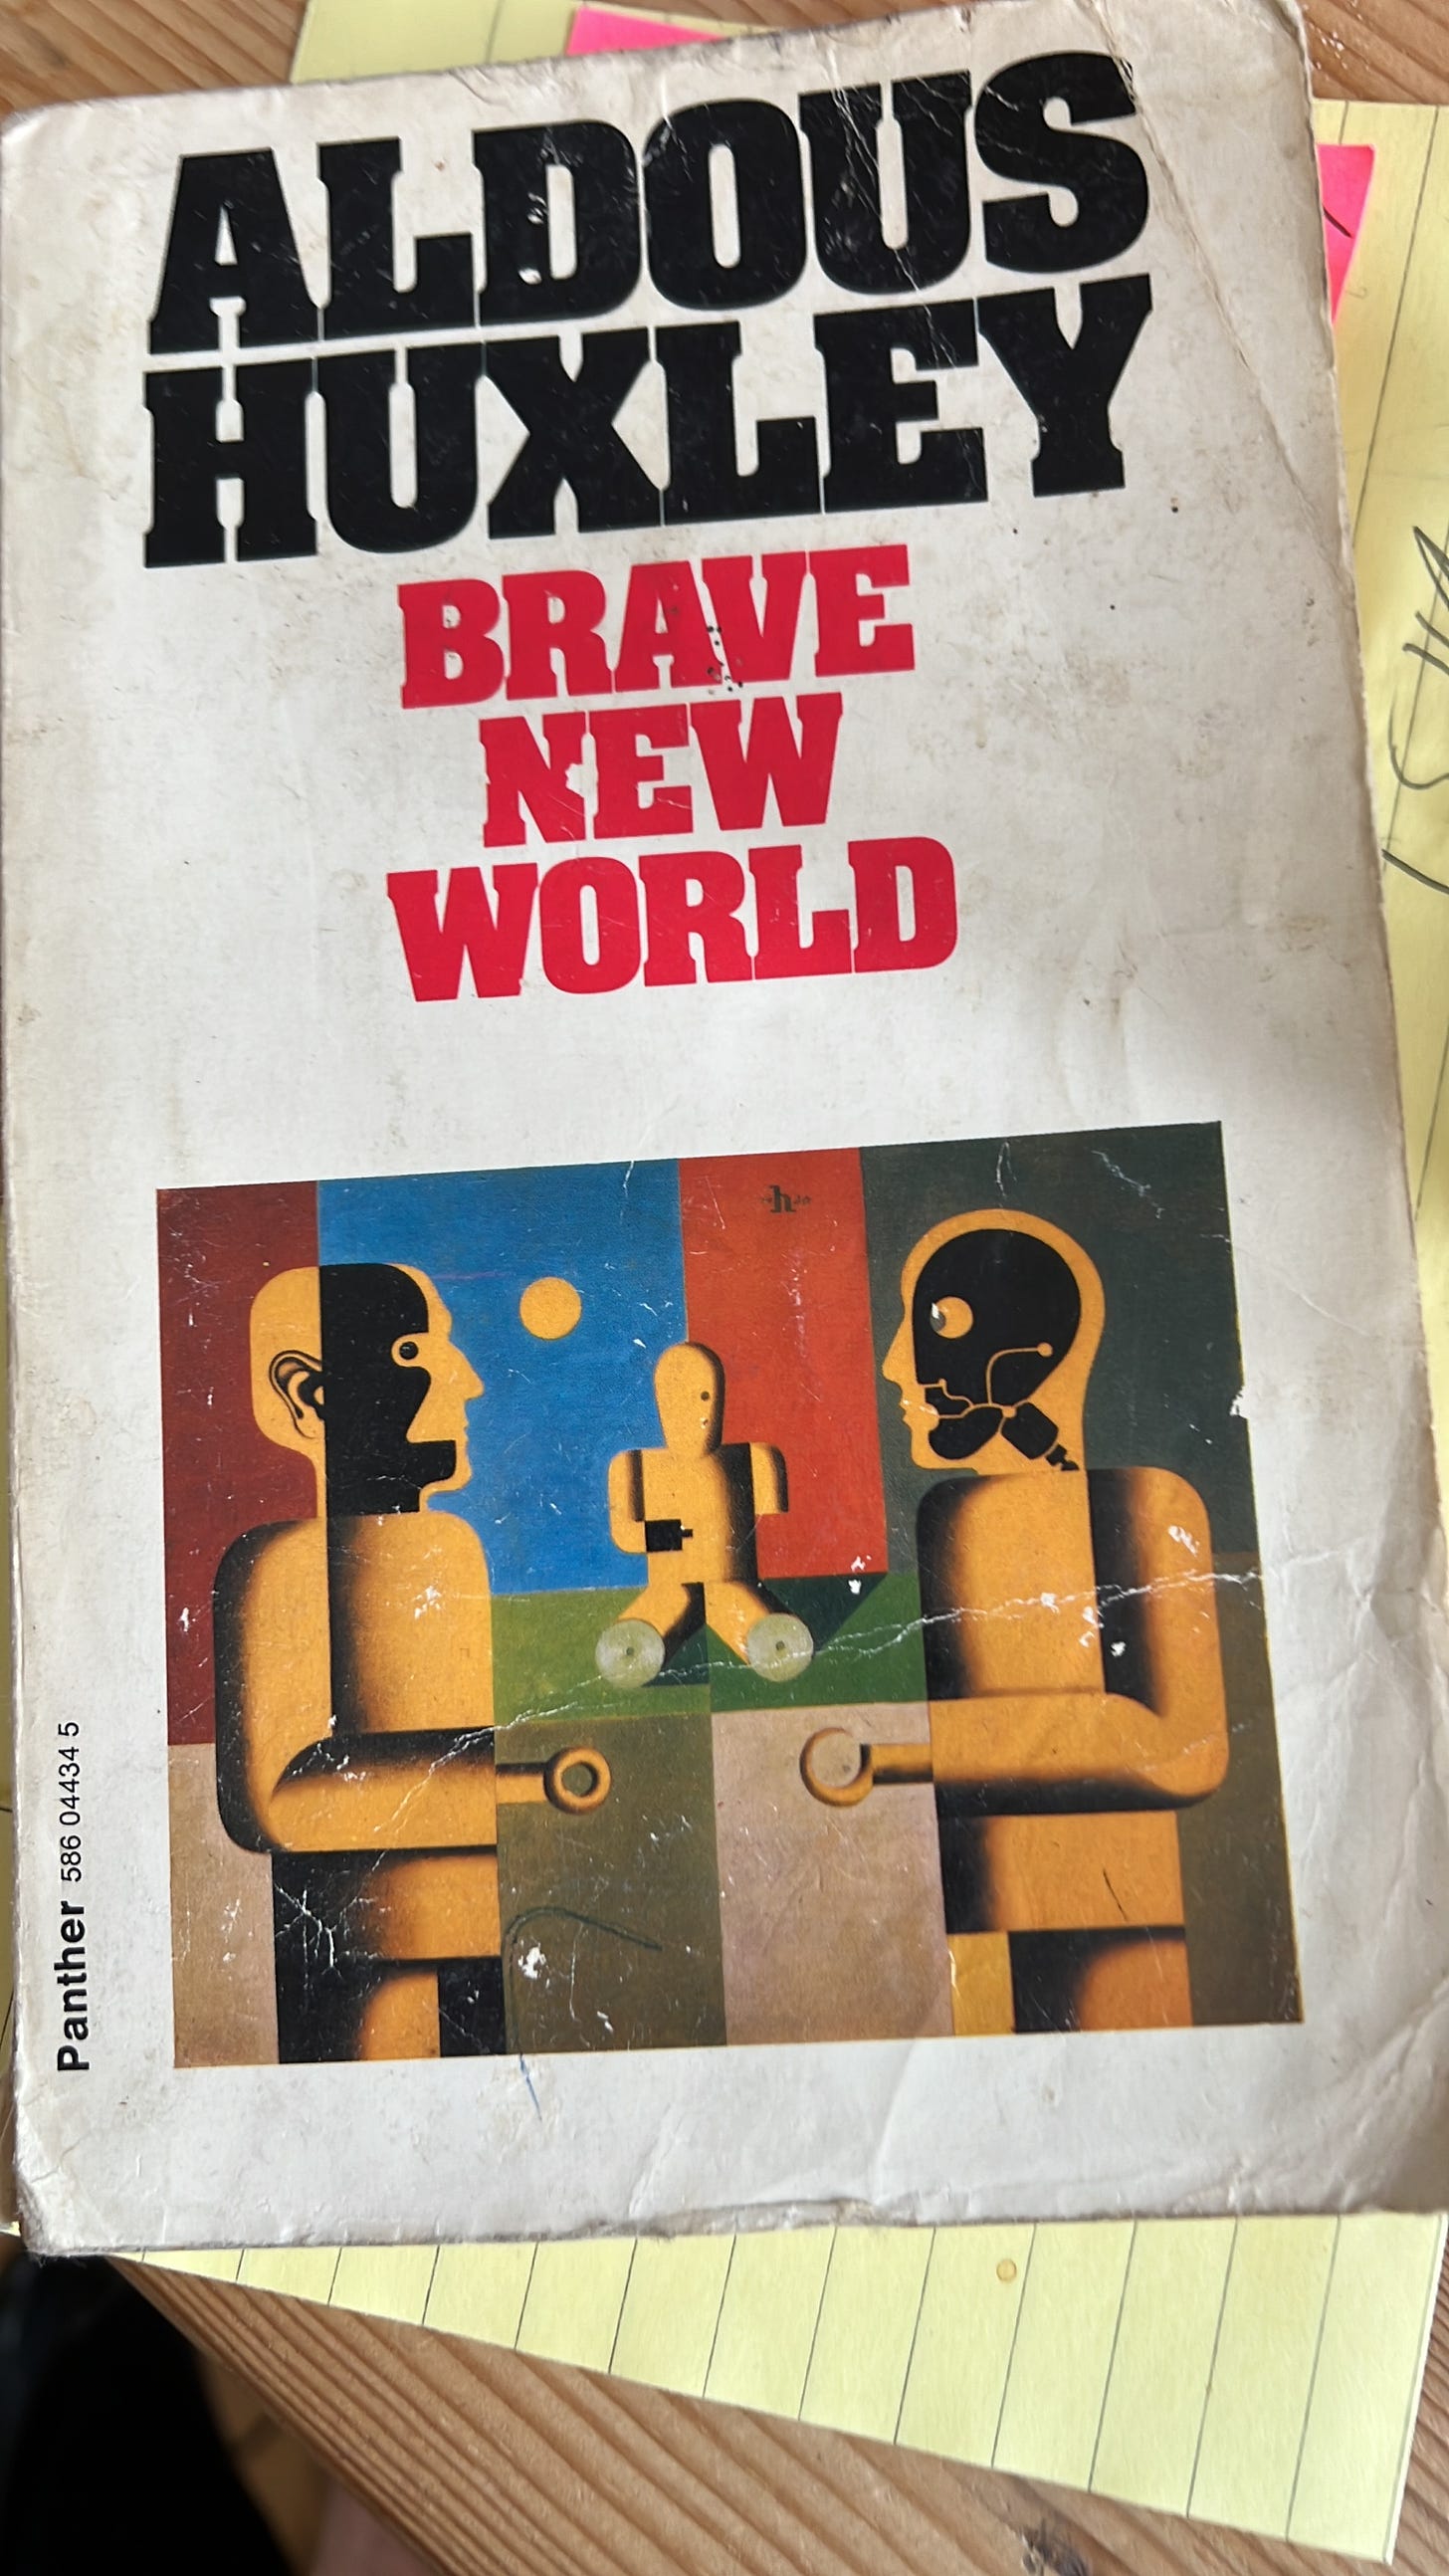 Cover of my 40 year old edition of Brave New World by Aldous Huxley